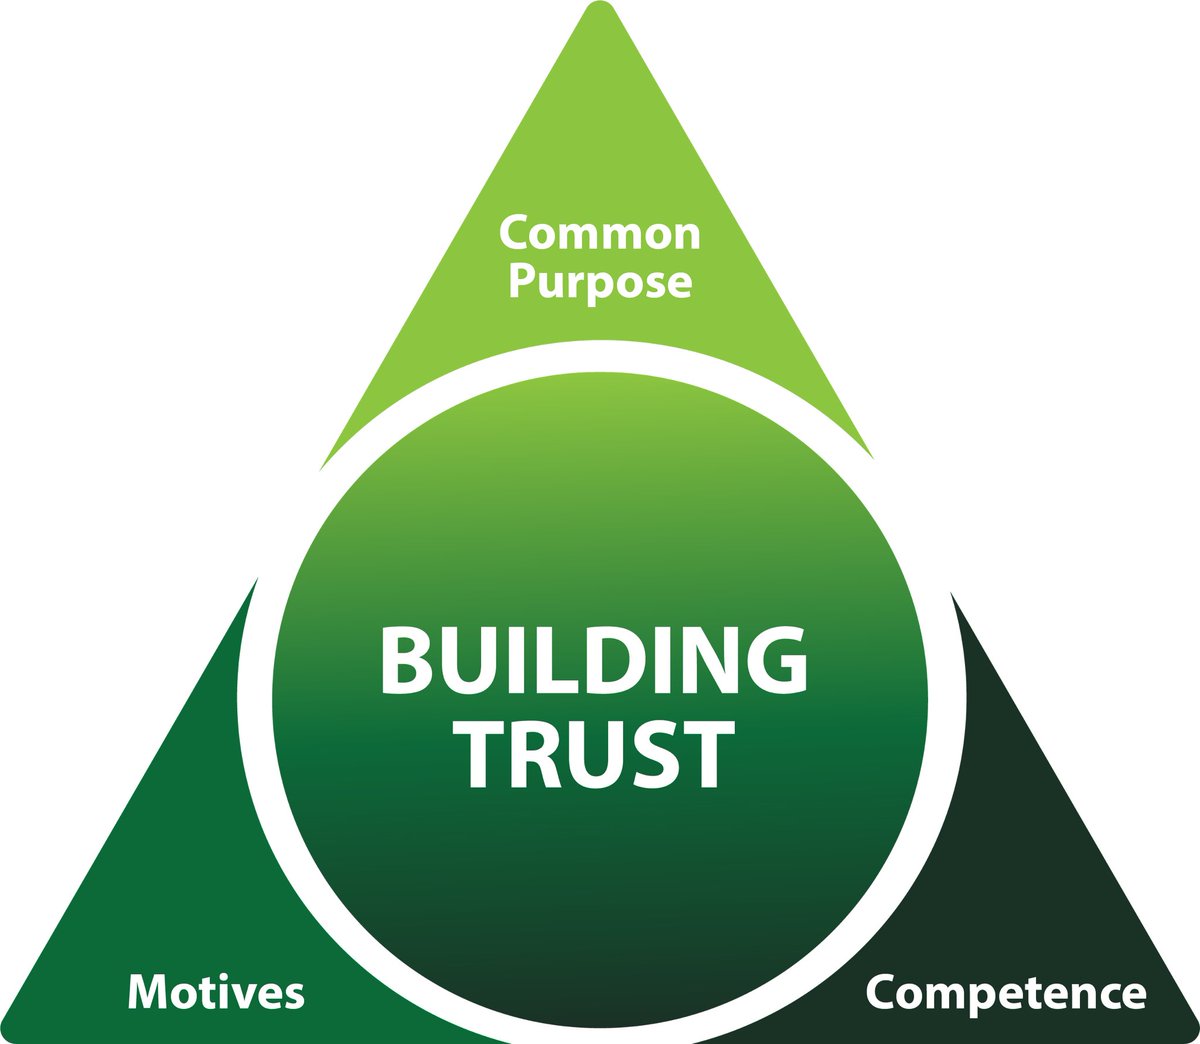 Competence & Trust: a high-performing team’s success in #globalhealth. Competence - well trained, motivated, professionals, doing priority work in a well-run, functional institution. Trust - a repeatedly reliable team! Are you 🫵🏽 part of “competence and trust”? Dr. Ahmed Ogwell